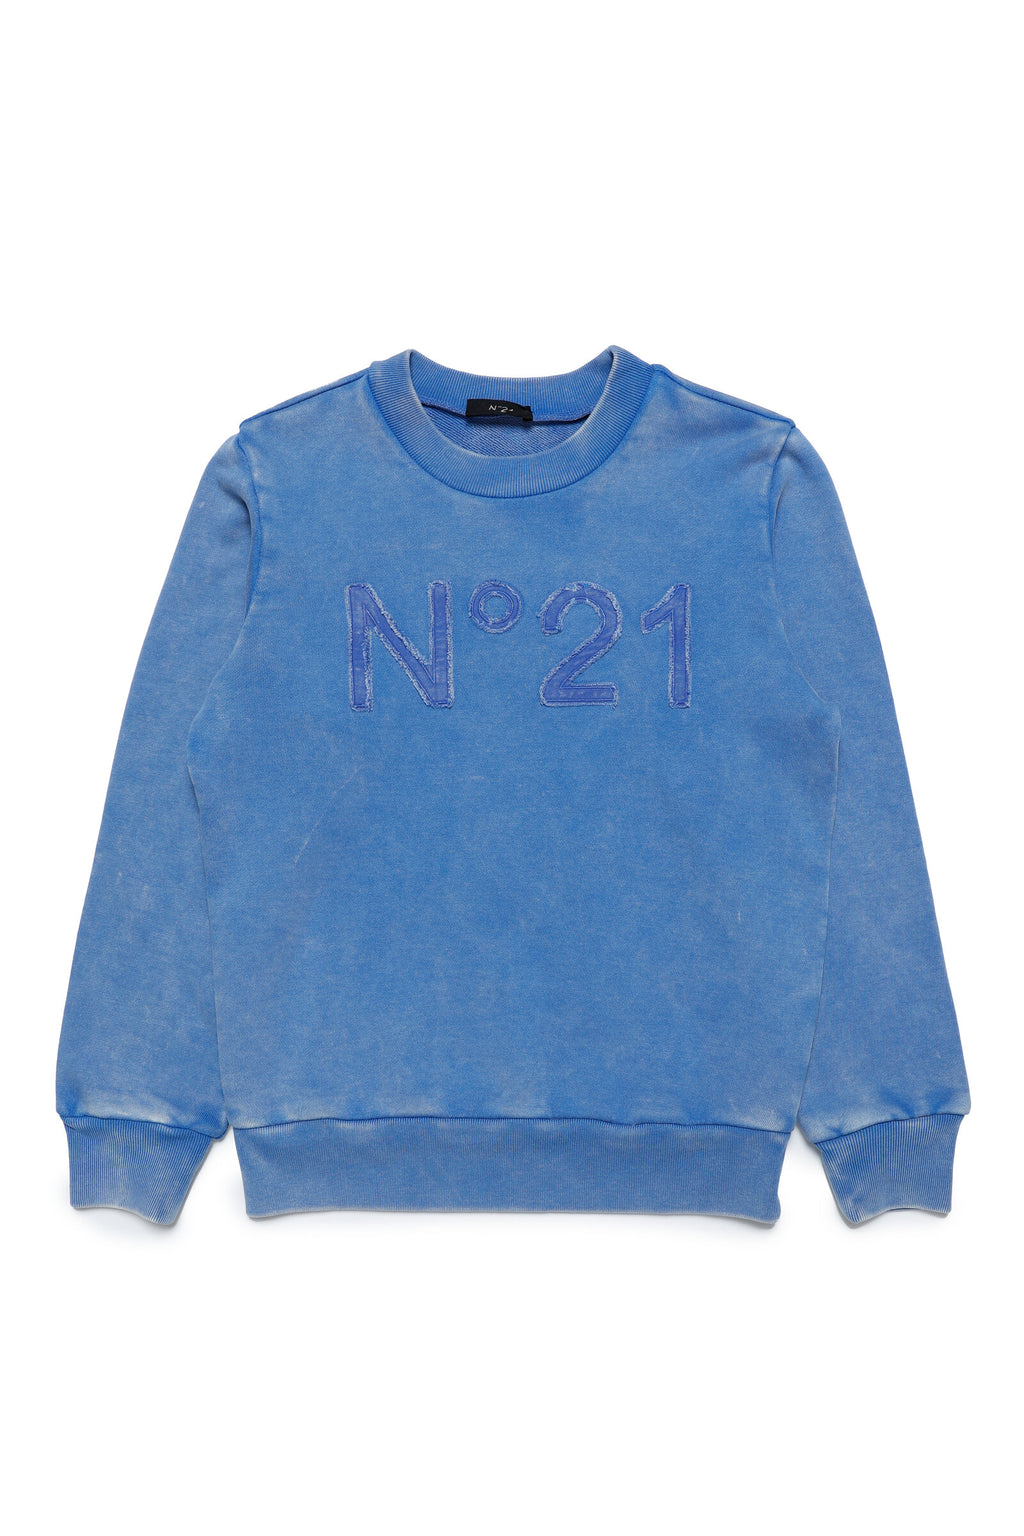 N°21 Fashion Clothing Outlet for Kids and Teens | Brave Kid